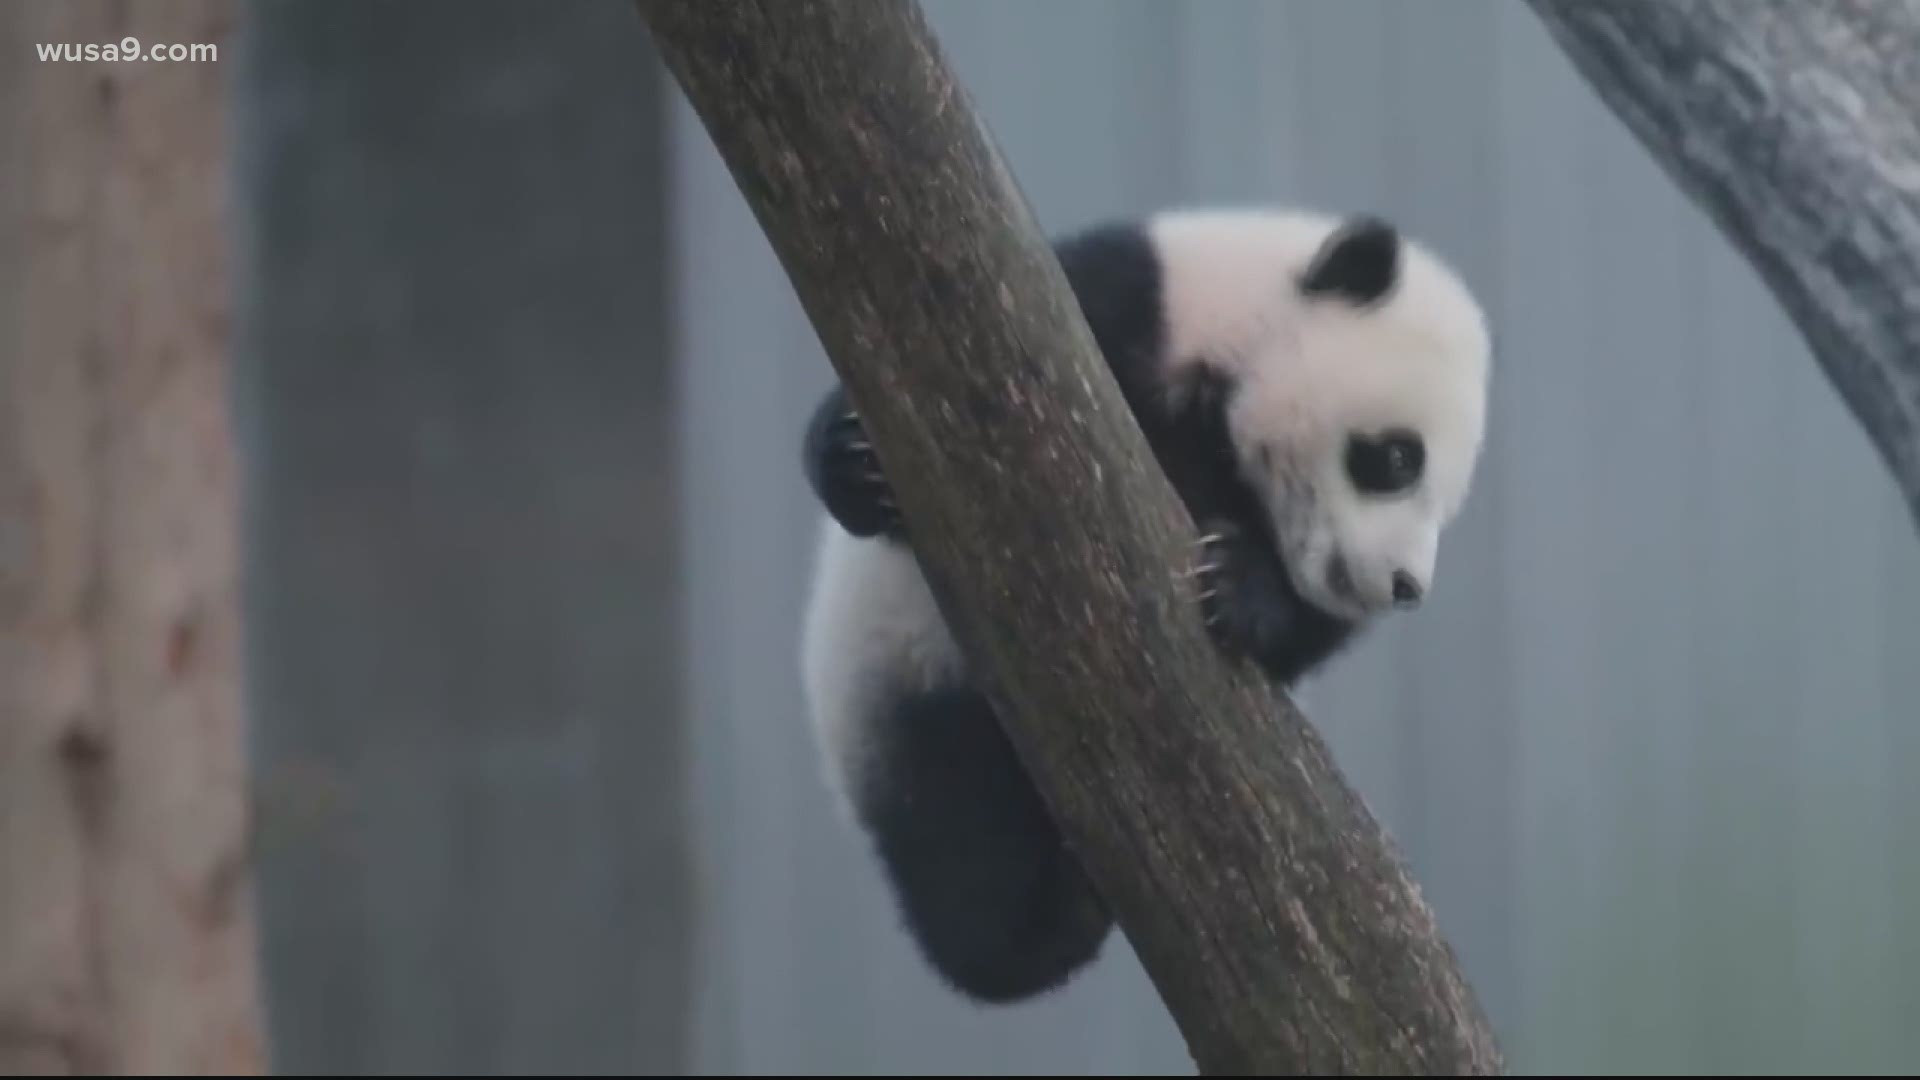 National Zookeepers say in recent days, giant panda cub Xiao Qi Jihe has been heading outside a little for morning climb sometimes with mom, before taking a nap.